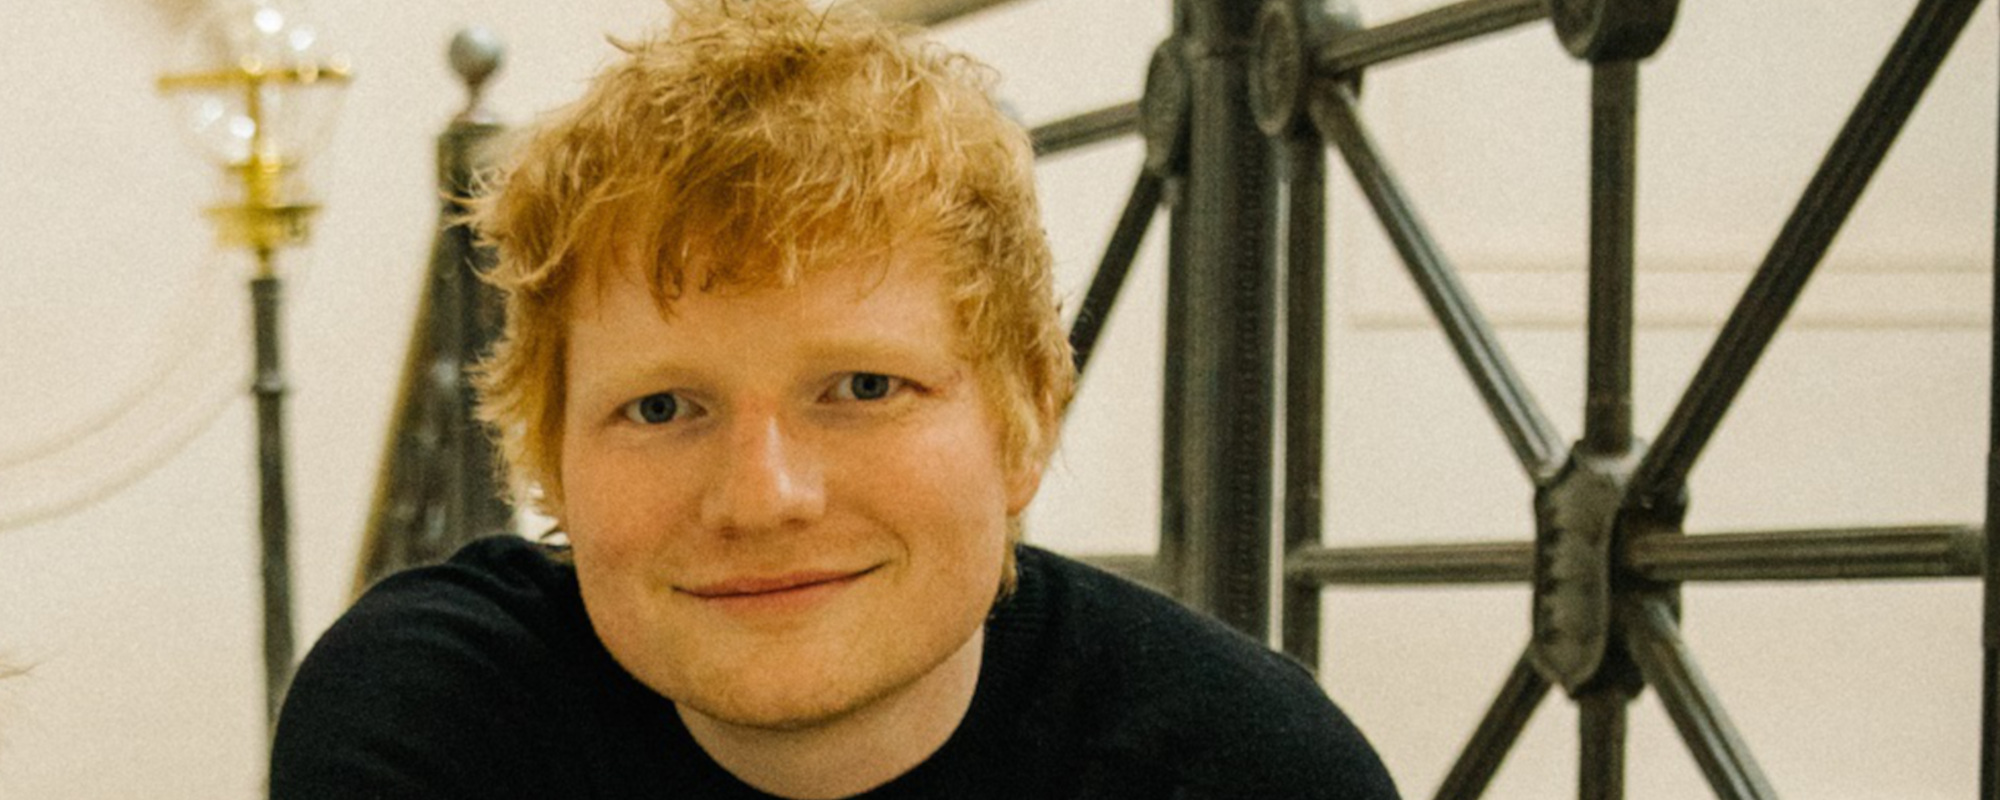 Ahead of New LP Release, Ed Sheeran Tests Positive for COVID-19